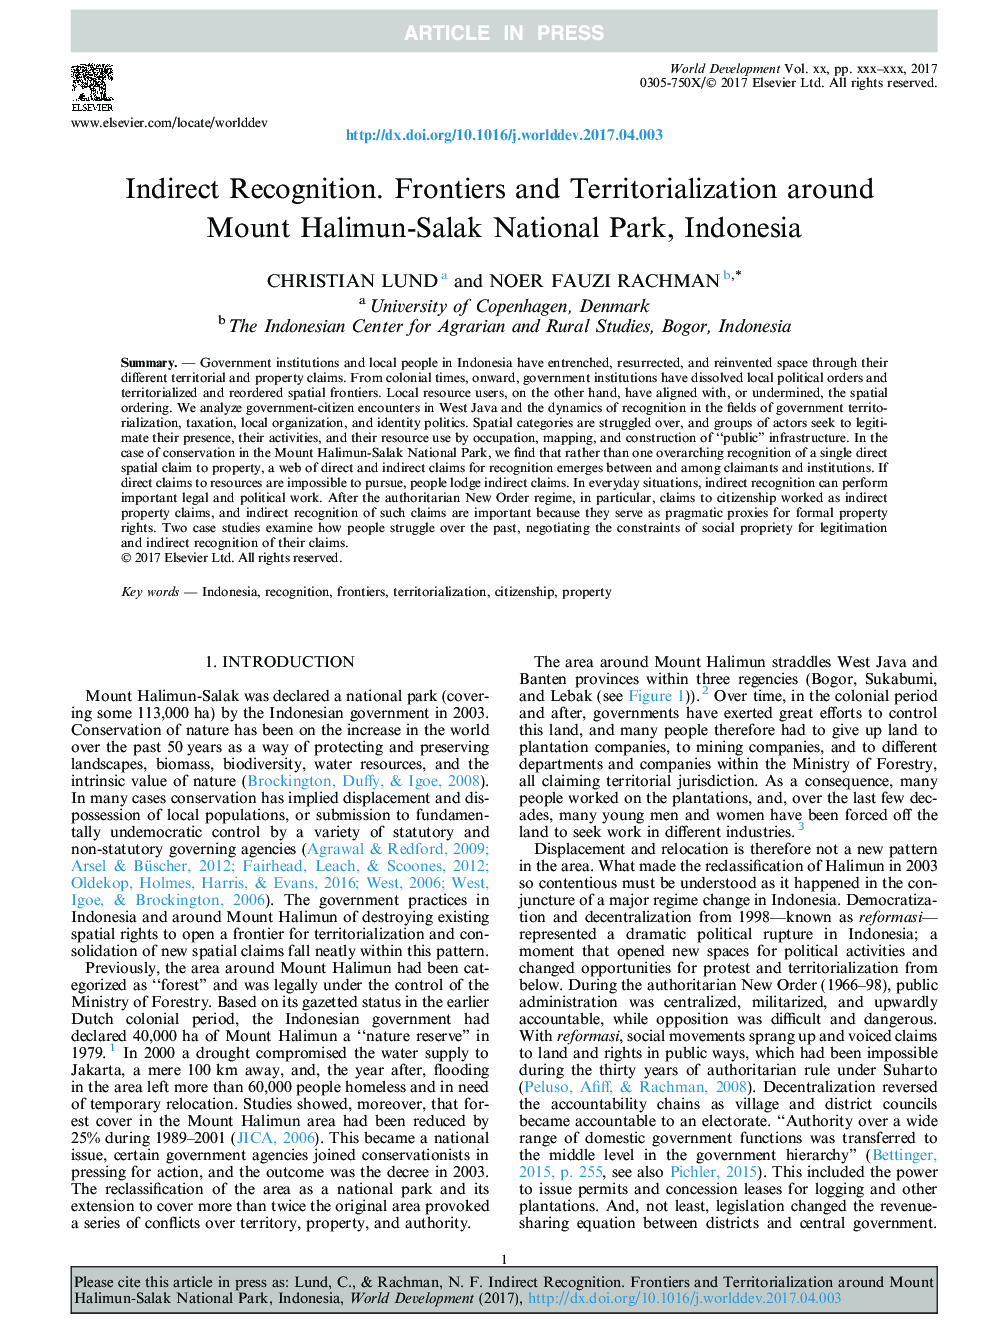 Indirect Recognition. Frontiers and Territorialization around Mount Halimun-Salak National Park, Indonesia